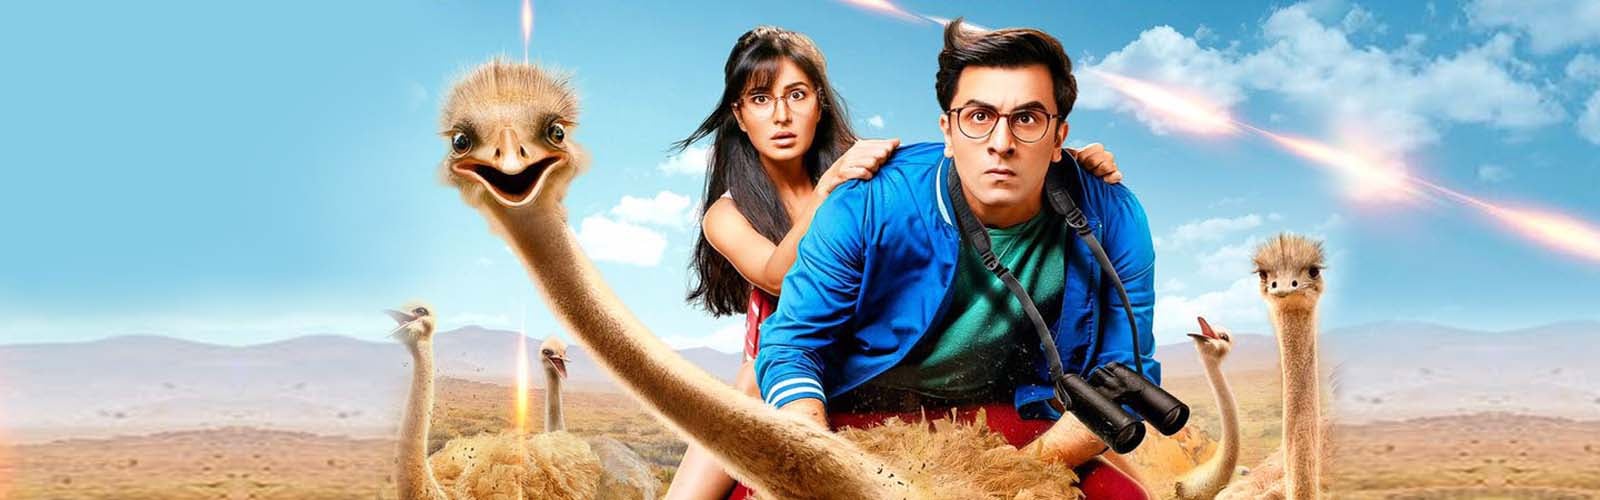 Jagga Jasoos: Not much rich and colourful as it appears to be